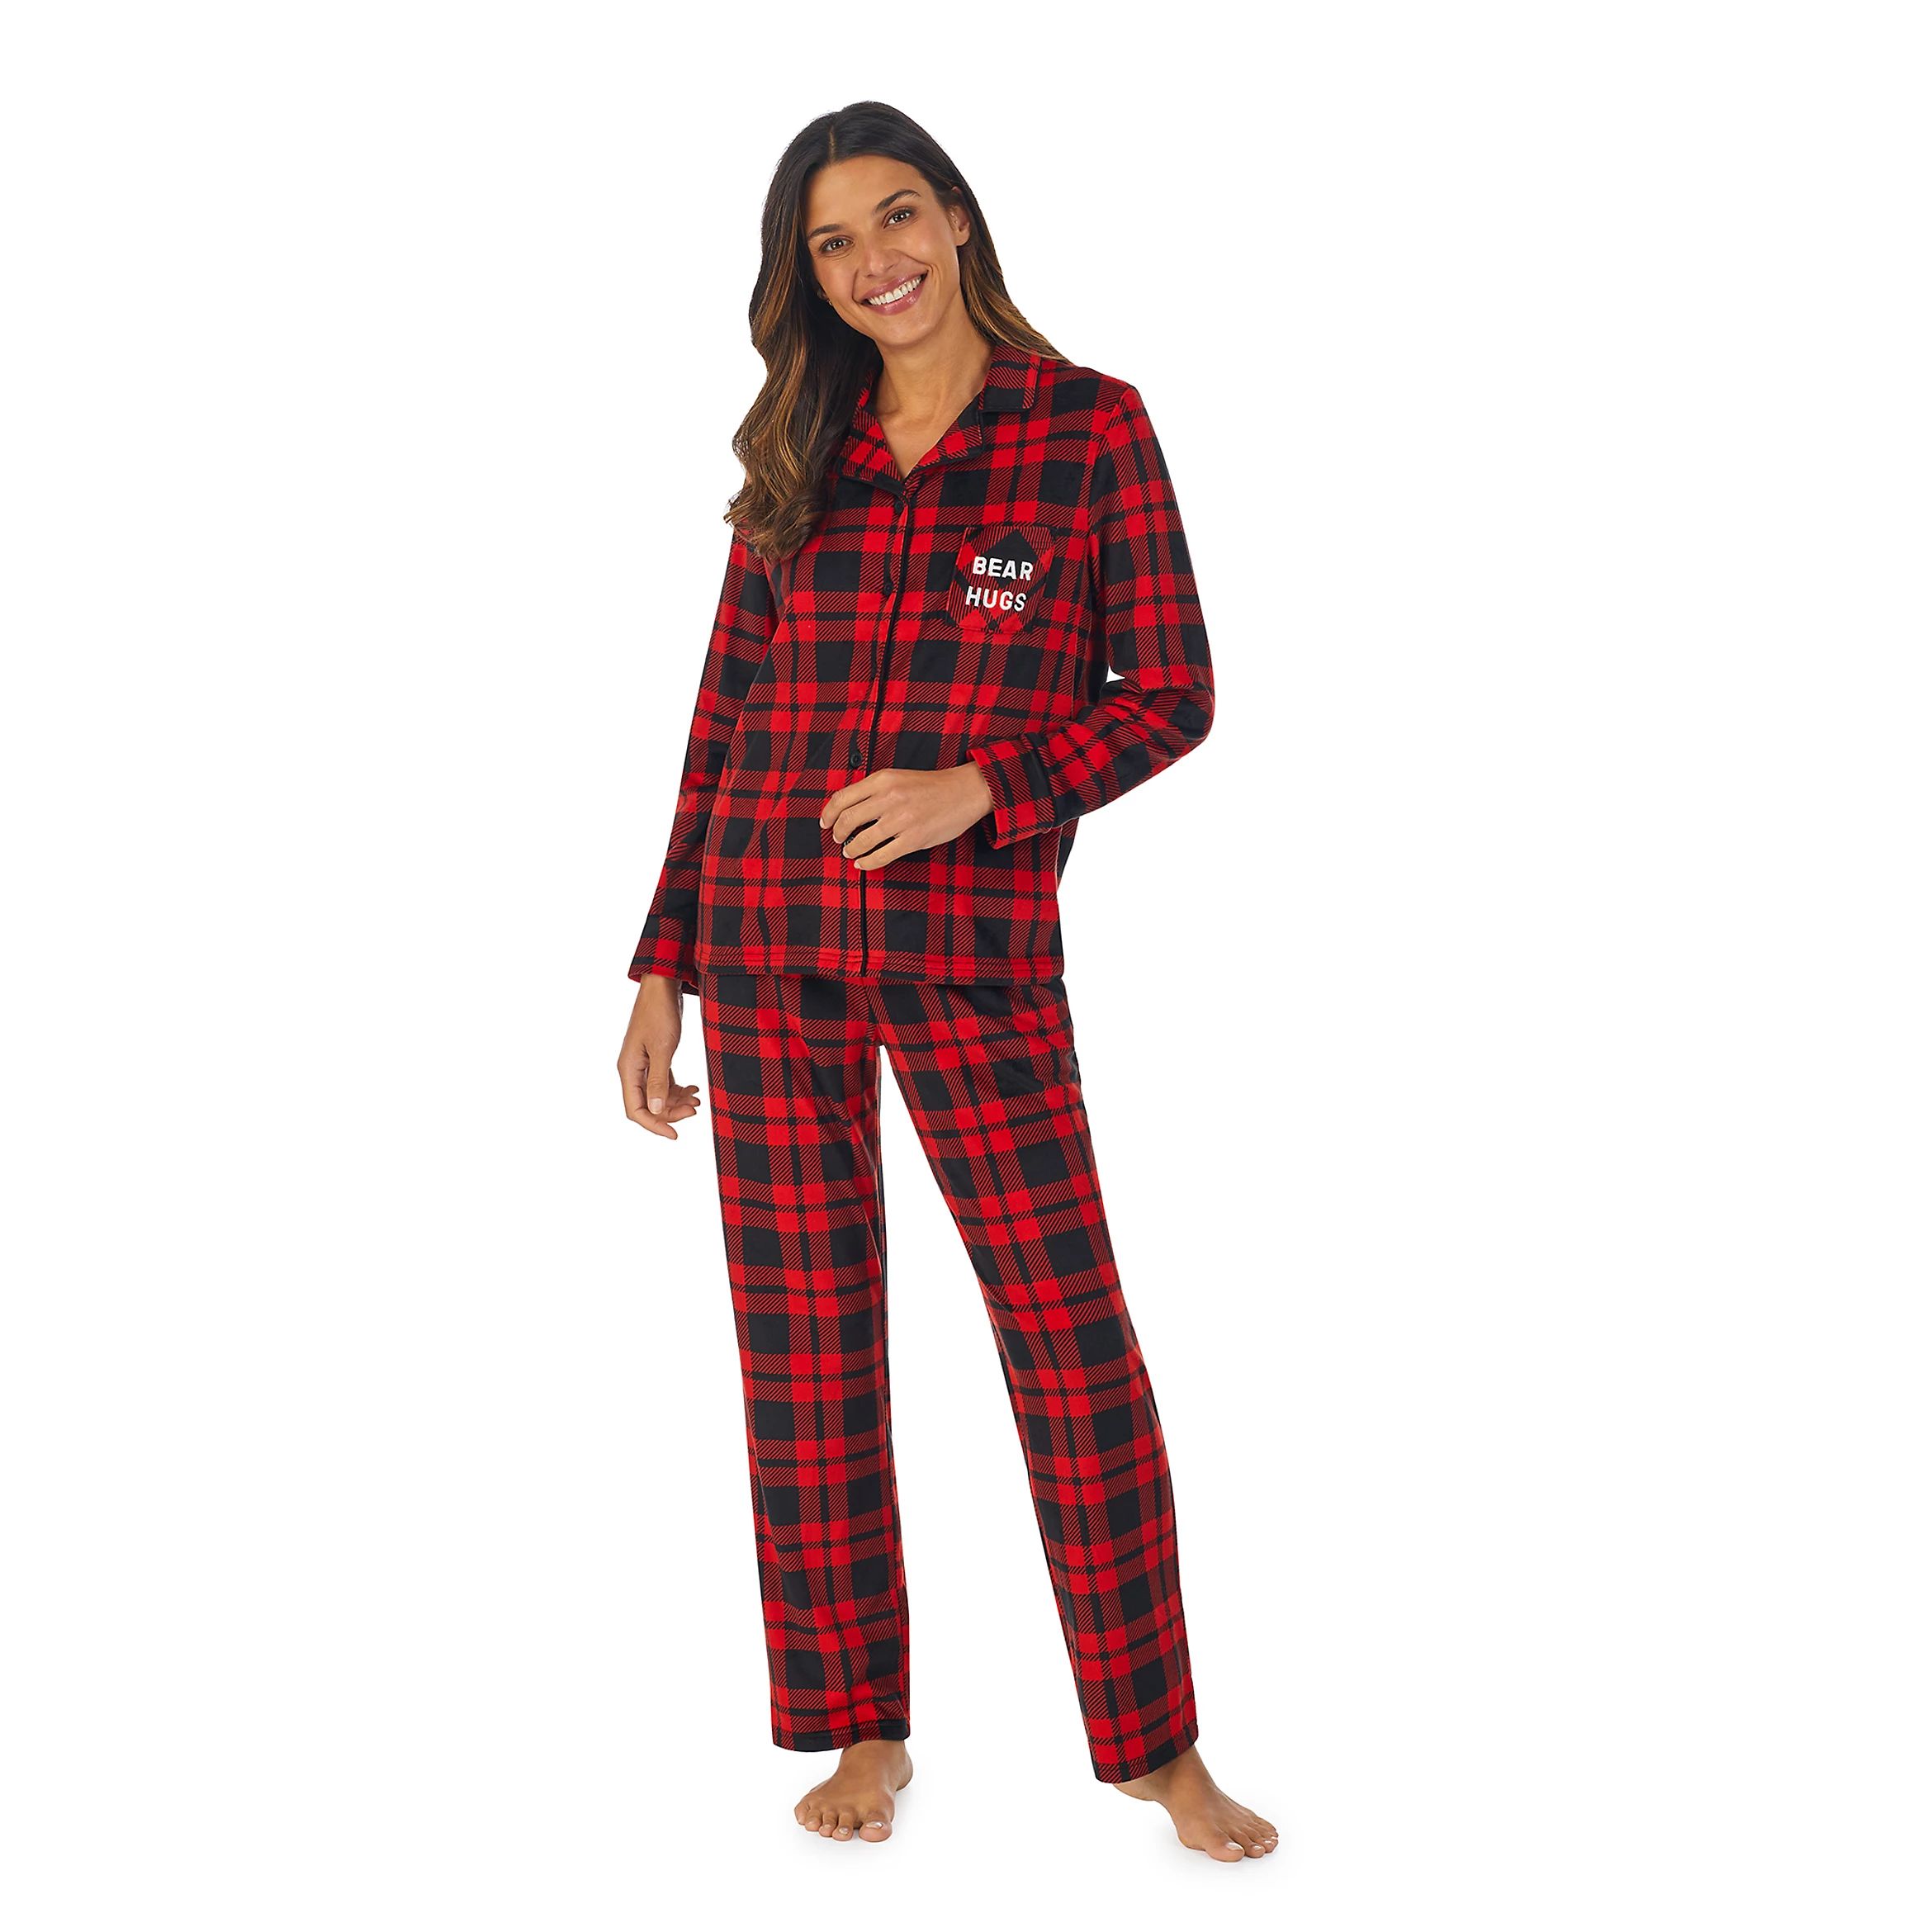 Women's Jammies For Your Families® Cool Bear Plaid Pajama Set by Cuddl Duds® | Kohl's